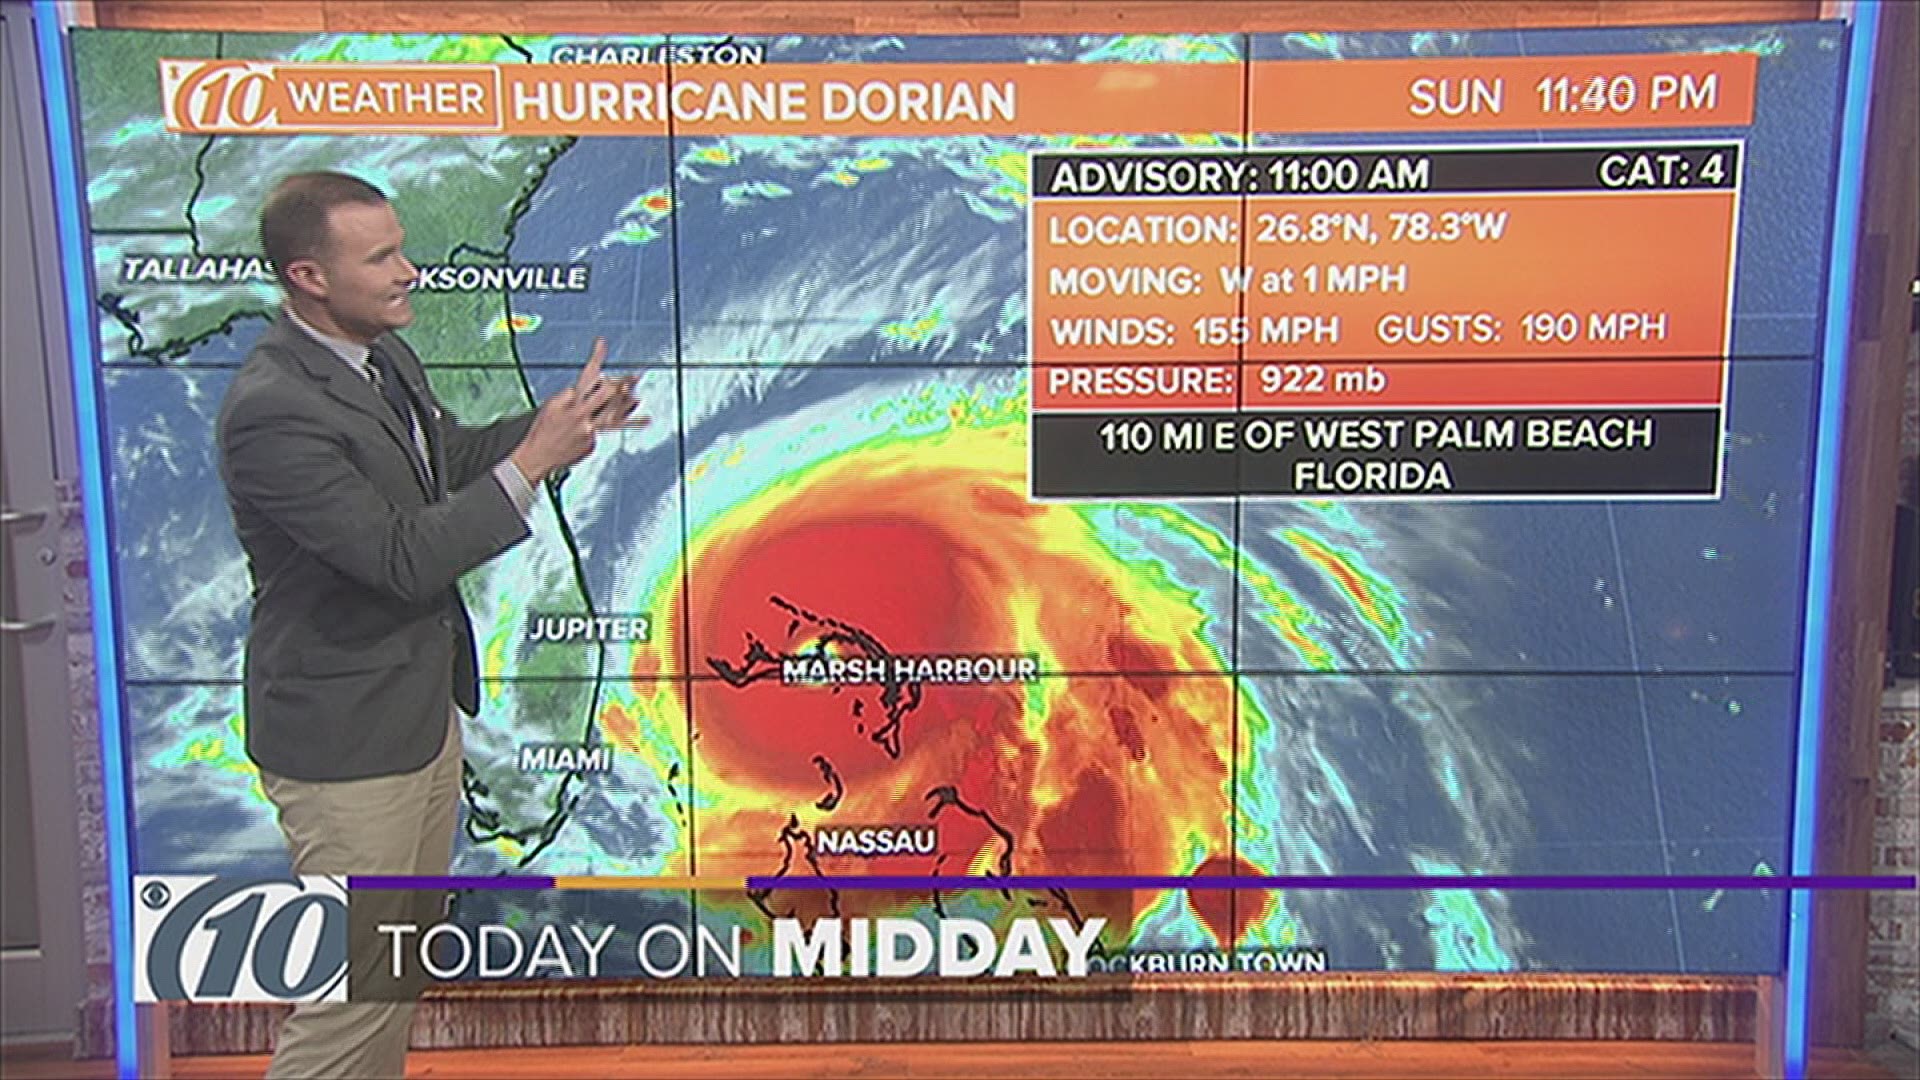 Hurricane Dorian is now a Category 4 storm with winds up to 155 mph.